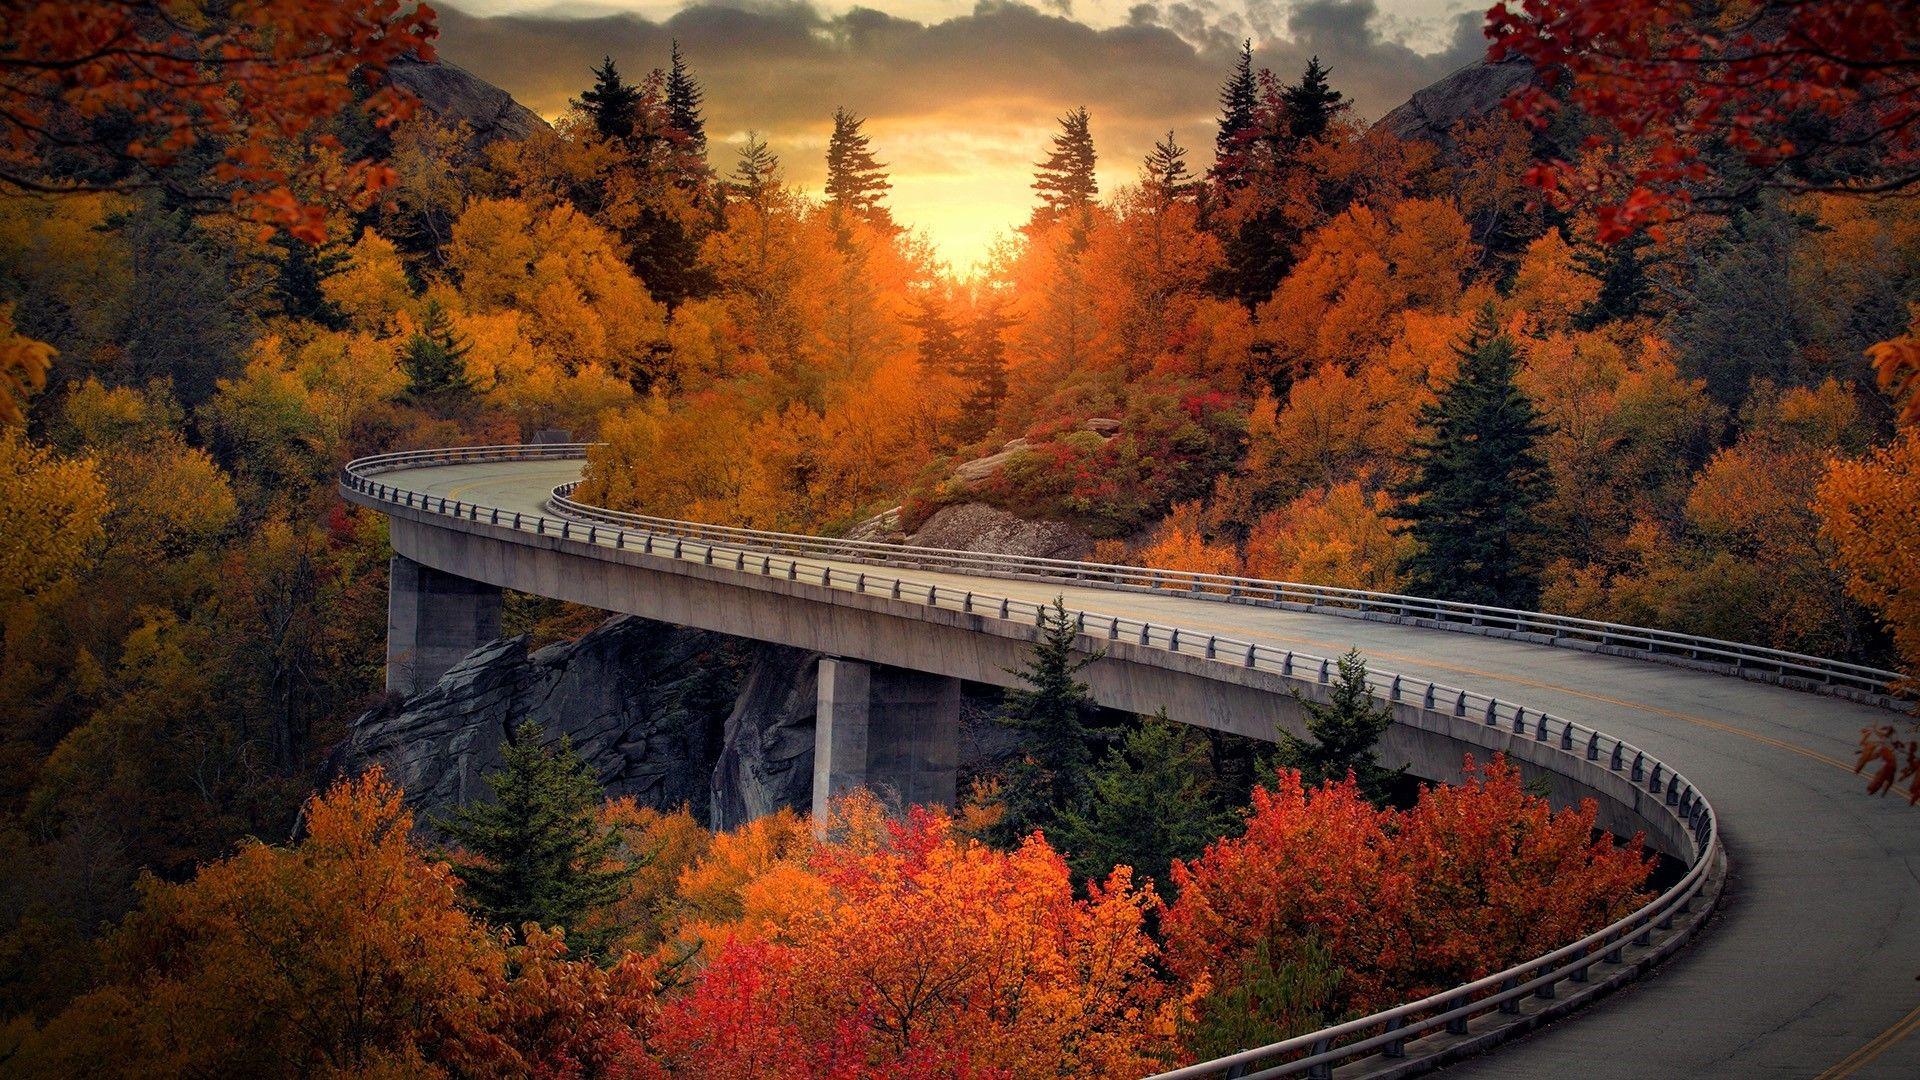 best retirement road trips in the US,best retirement road trips,best retirement road trip ideas,best scenic road trips in USA,bucket list trips that are perfect for retirement travel,most popular road trip routes,retired and travelling,retired road trip,retirement adventures,retirement road trip ideas,retirement road trips,retirement travel ideas,retirement trips,road trips for retirees,road trips for seniors,road trip with senior citizens,best road trips in the USA,road trip guides,overland routes,best road trip ideas US,road trip north USA,best road trips from Los Angeles,epic road trips in the US,ideas for an incredible American road trip,north USA road trip,planning the great American road trip,road trip ideas in the US,road trip to north west USA,best road trips,road trips in the US,best road trips in US,best road trips USA,best US road trips,best road trips in America,best driving road trips in America,best road trips America,best road trips for retirees in the US,best road trips in USA,best US road trips for seniors,cross country road trip route,most popular road trip destinations,most popular road trips in the US,the great American road trip,top road trips in the US,travel retirement ideas,ultimate US road trip,most scenic road trips in the US,retirement road trips in the US,retirement travel in USA,road trip destinations in the USA,trips to take in the US,best way to travel the US in retirement